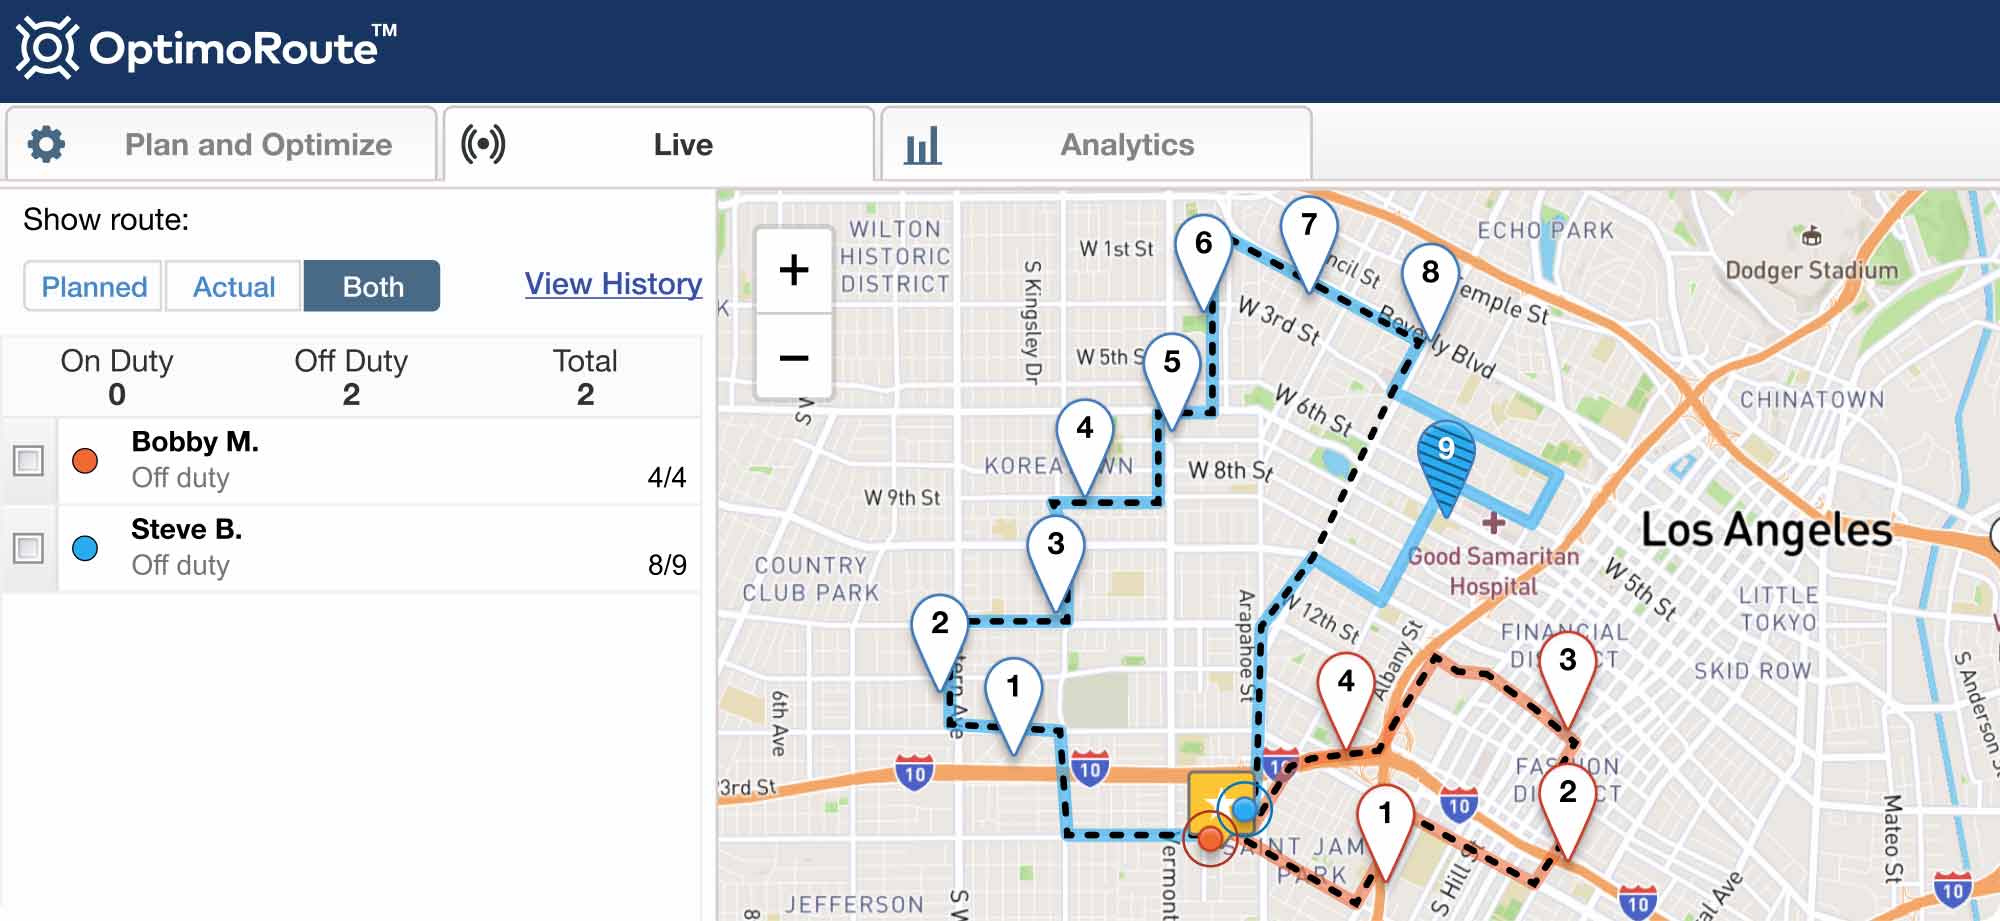 OptimoRoute - Breadcrumbs trails let you see where drivers have deviated from planned routes